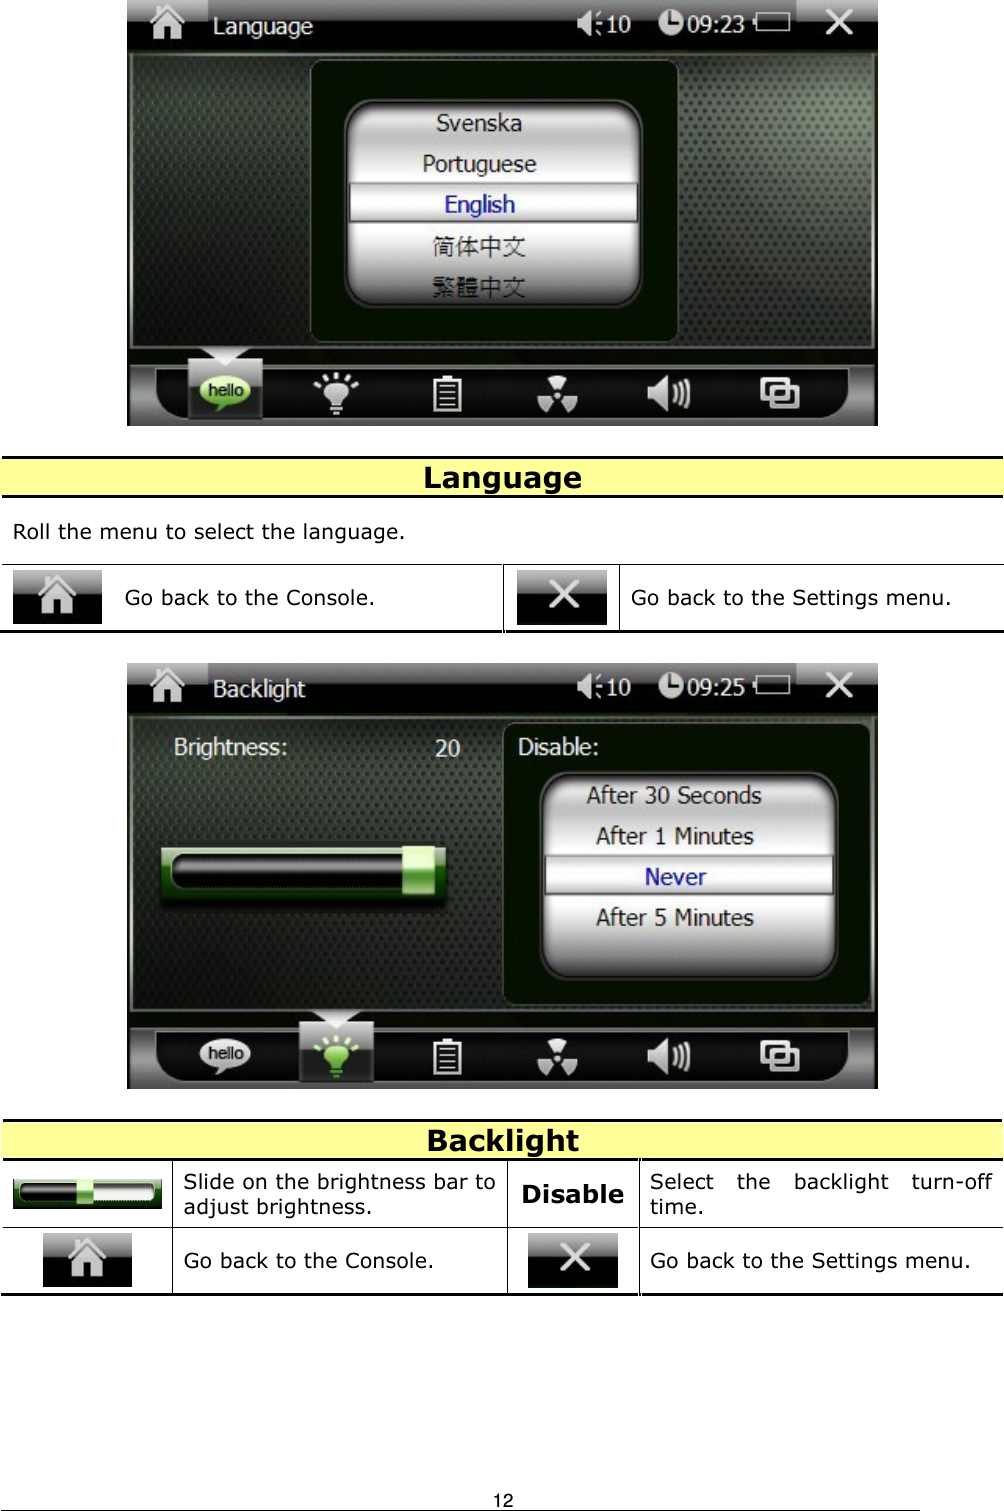                                                                             12  Language Roll the menu to select the language.  Go back to the Console.  Go back to the Settings menu.    Backlight  Slide on the brightness bar to adjust brightness. Disable Select  the  backlight  turn-off time.  Go back to the Console.  Go back to the Settings menu. 